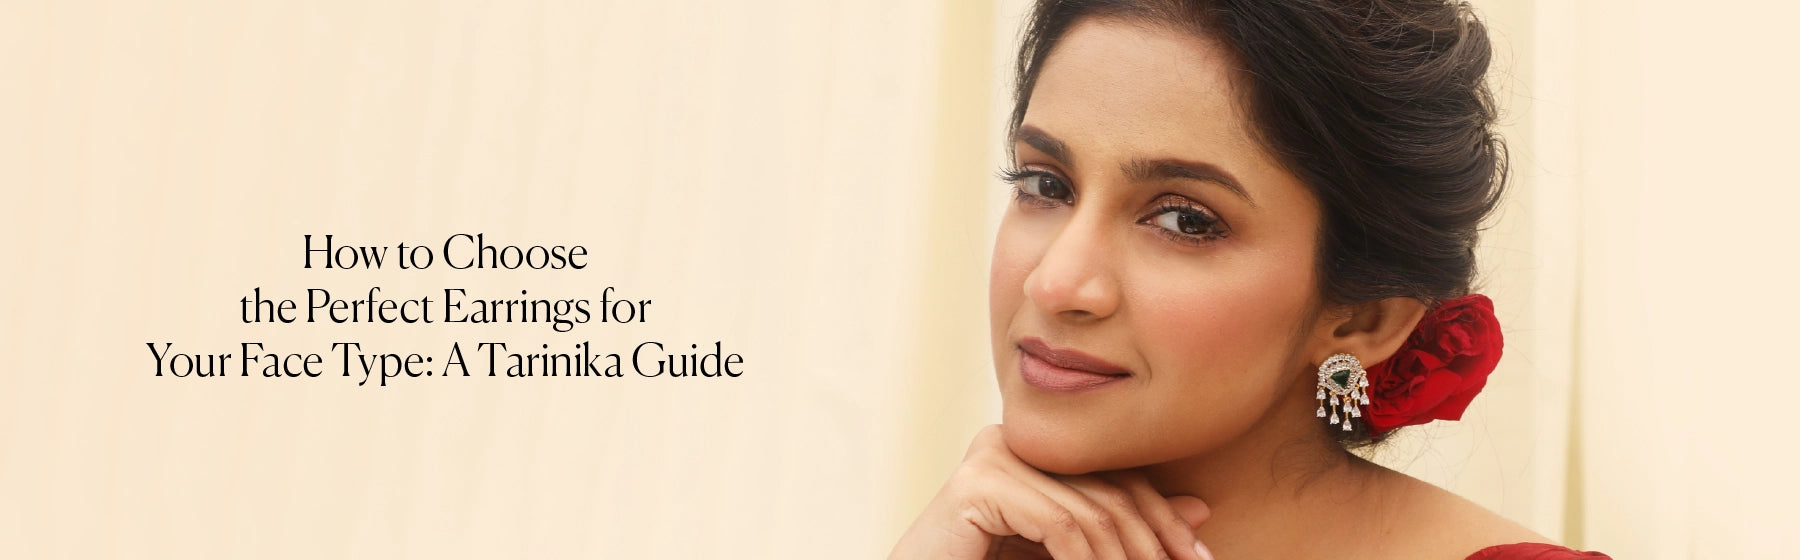 How to Choose the Perfect Earrings for Your Face Type: A Tarinika Guide